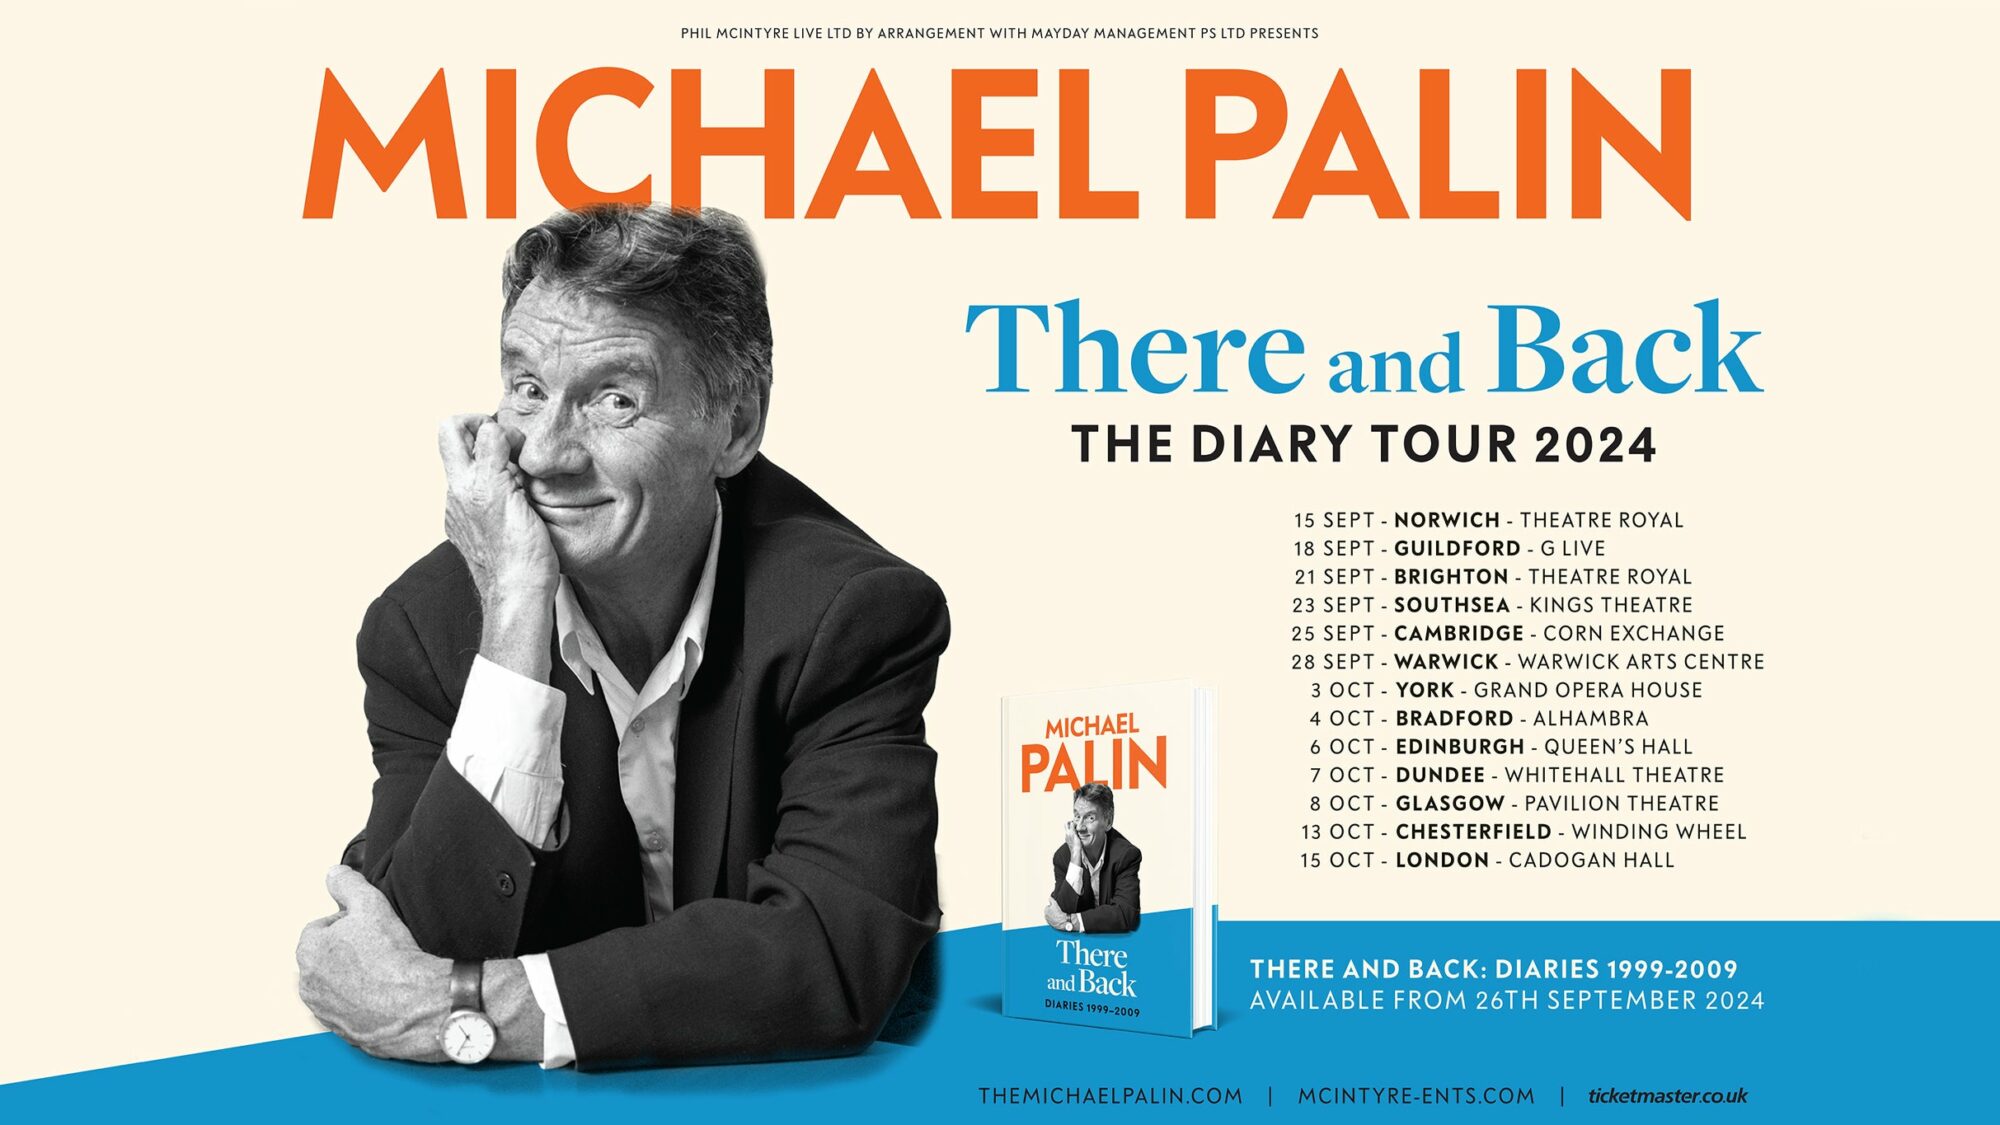 Image name Michael Palin There and Back at Alhambra Theatre Bradford the 11 image from the post Events in Yorkshire.com.